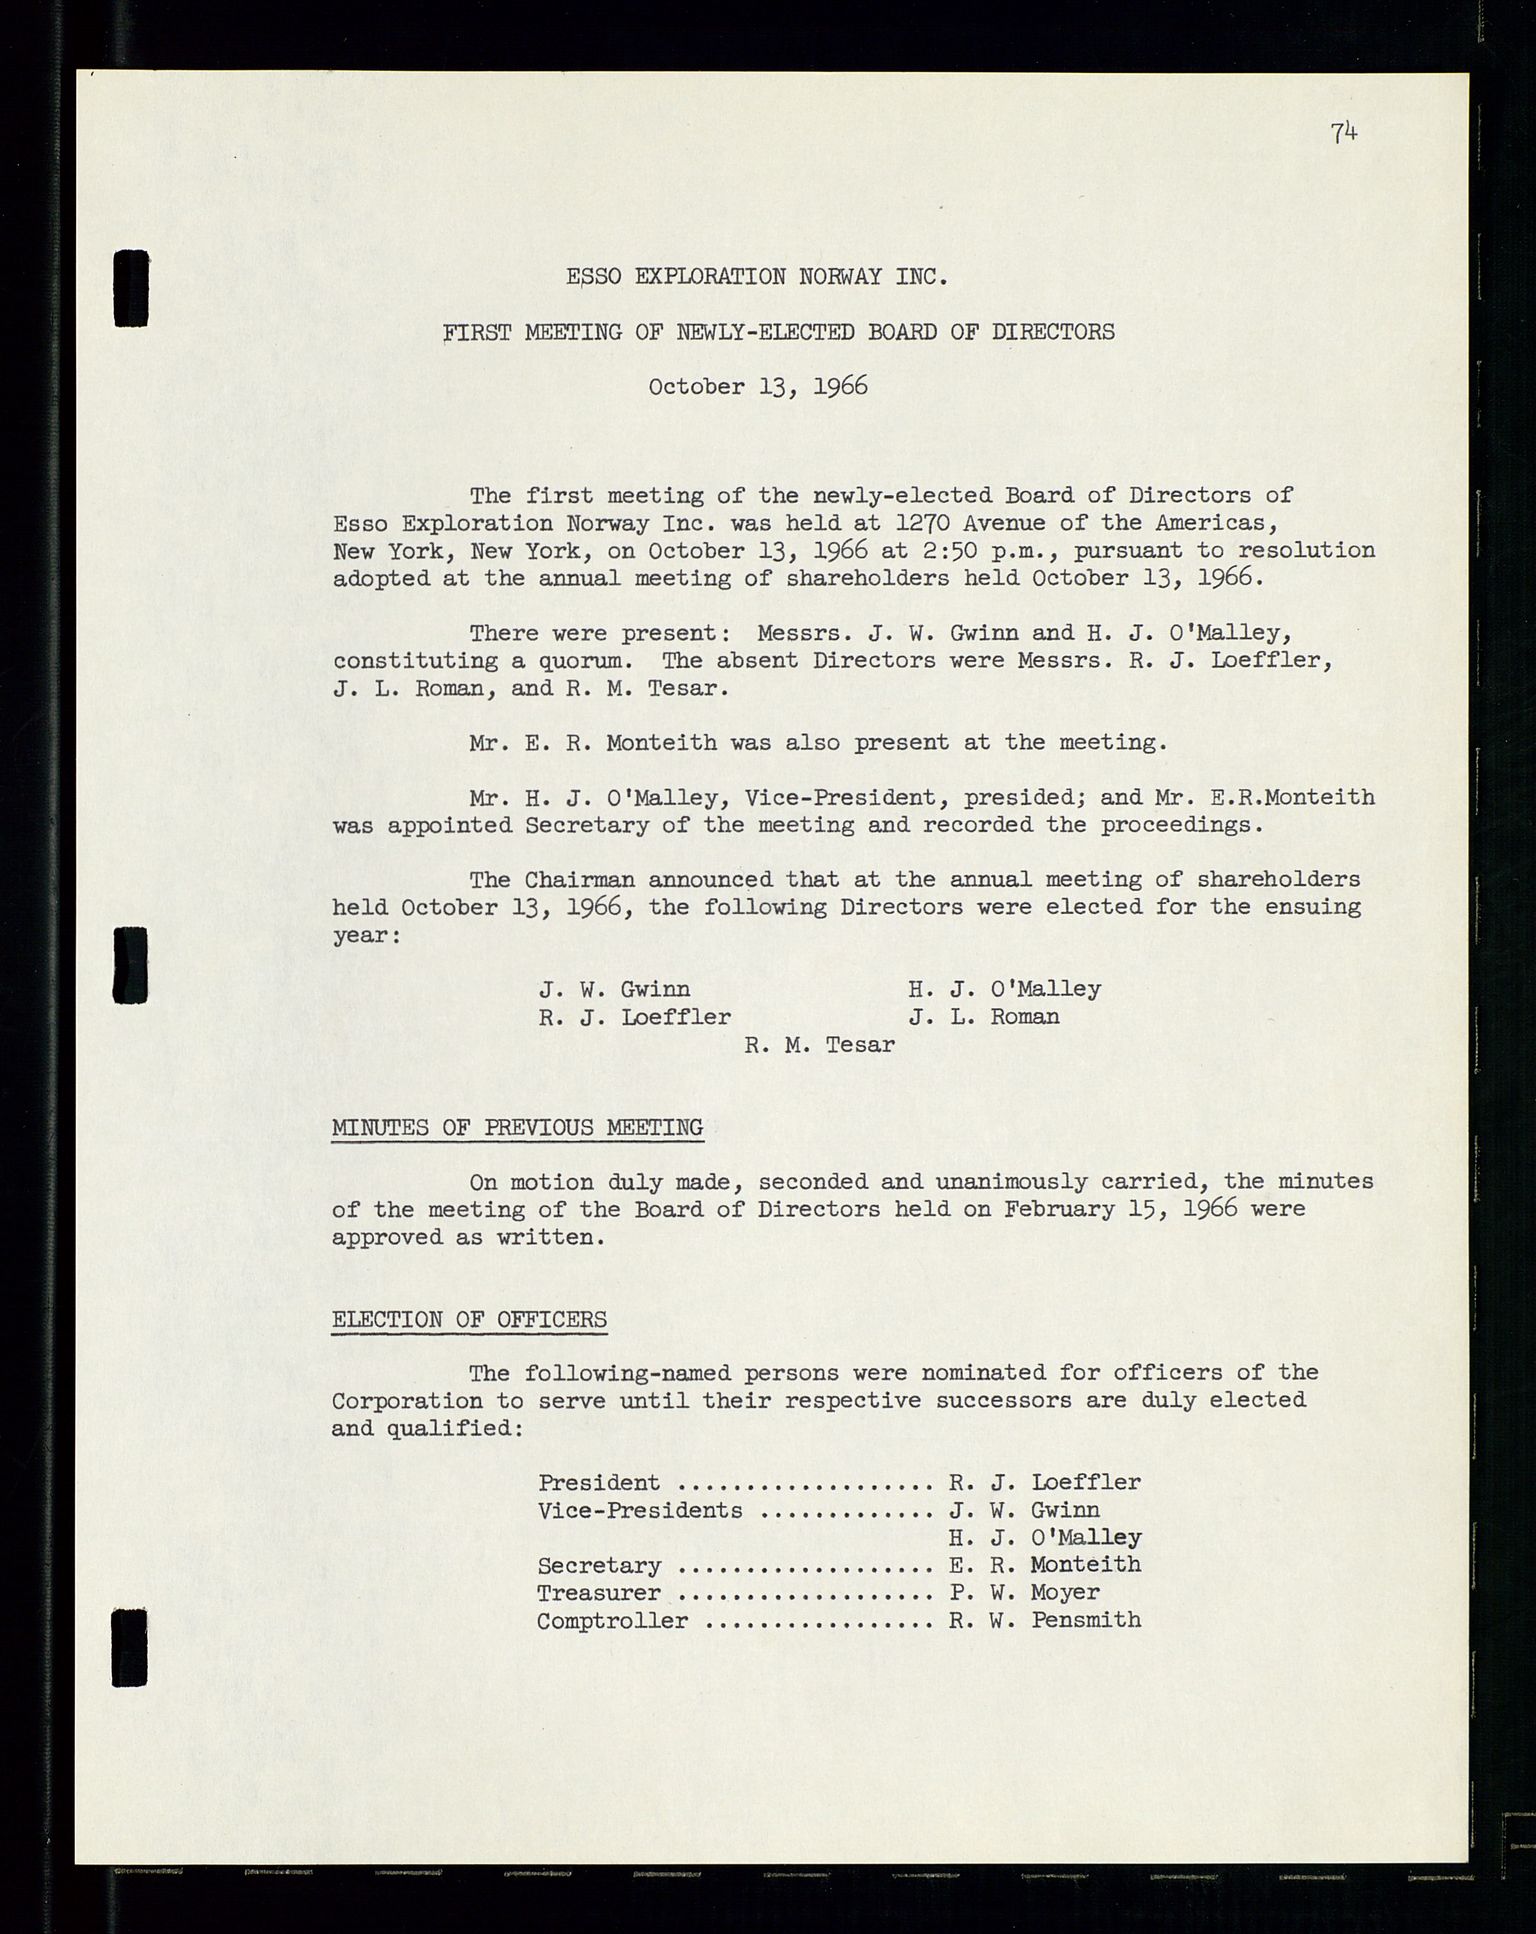 Pa 1512 - Esso Exploration and Production Norway Inc., SAST/A-101917/A/Aa/L0001/0001: Styredokumenter / Corporate records, By-Laws, Board meeting minutes, Incorporations, 1965-1975, s. 74